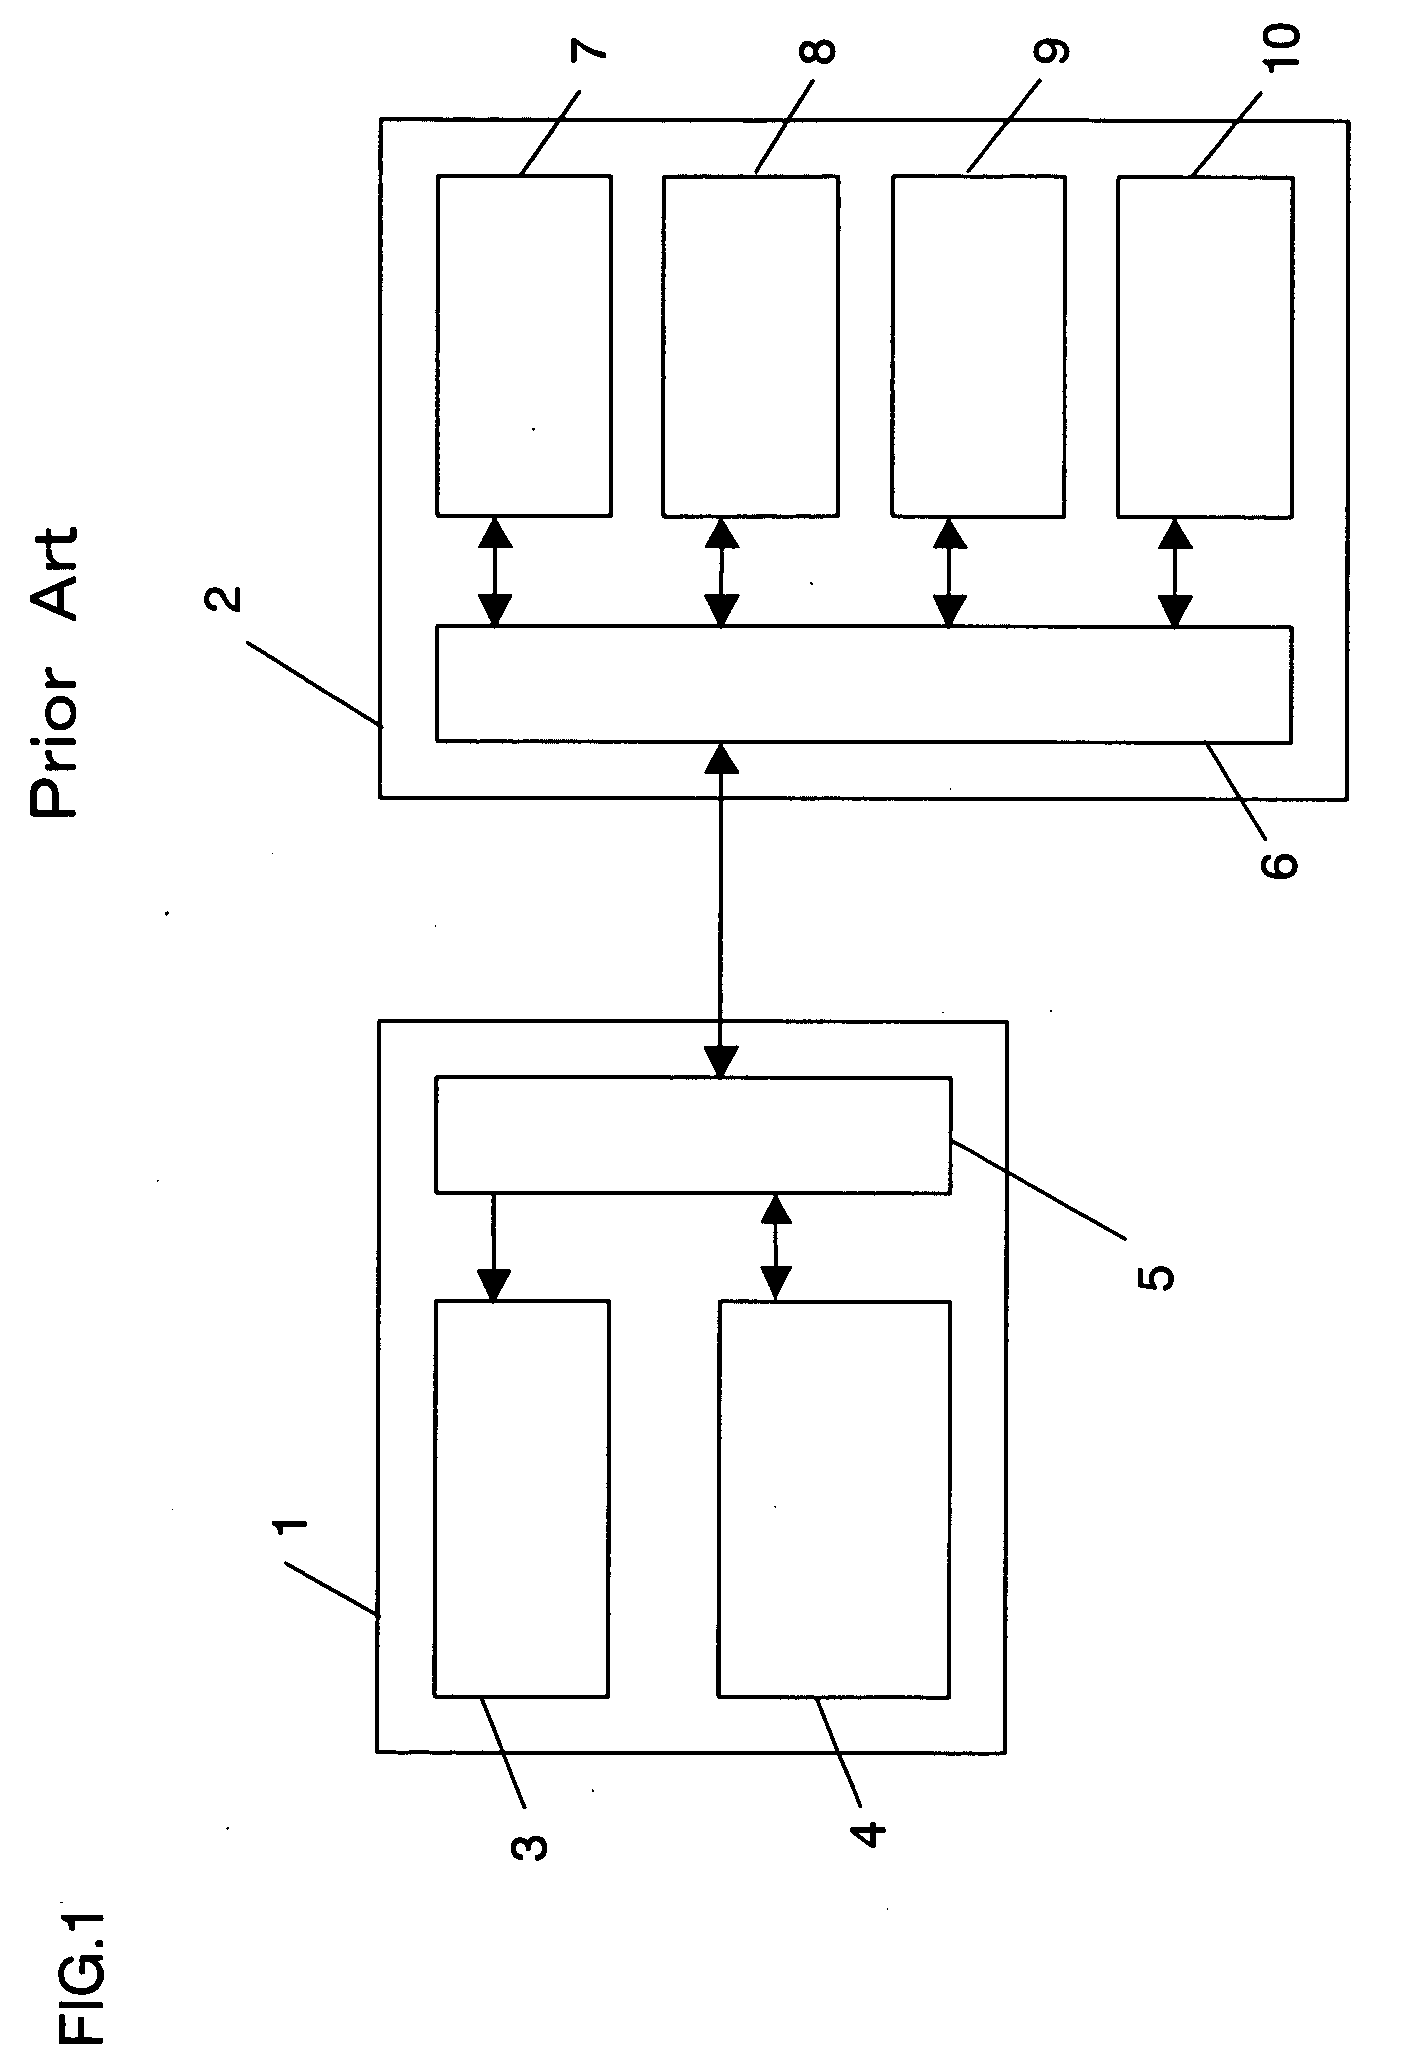 Apparatus and method for processing an image